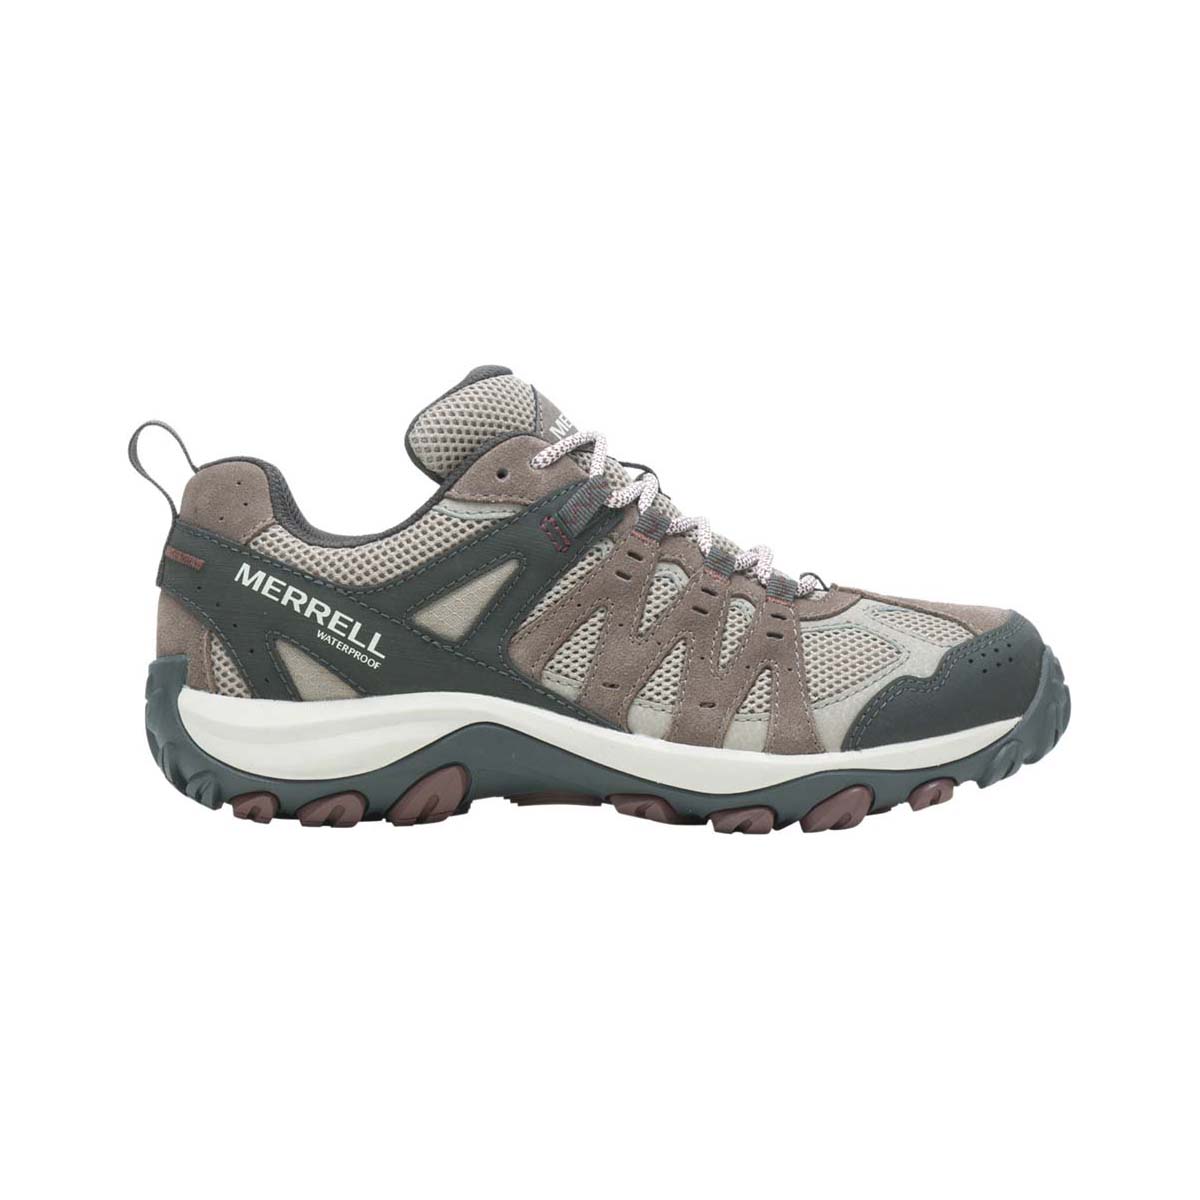 Merrell Accentor 3 Women's Low WP Hiking Boots Falcon 6